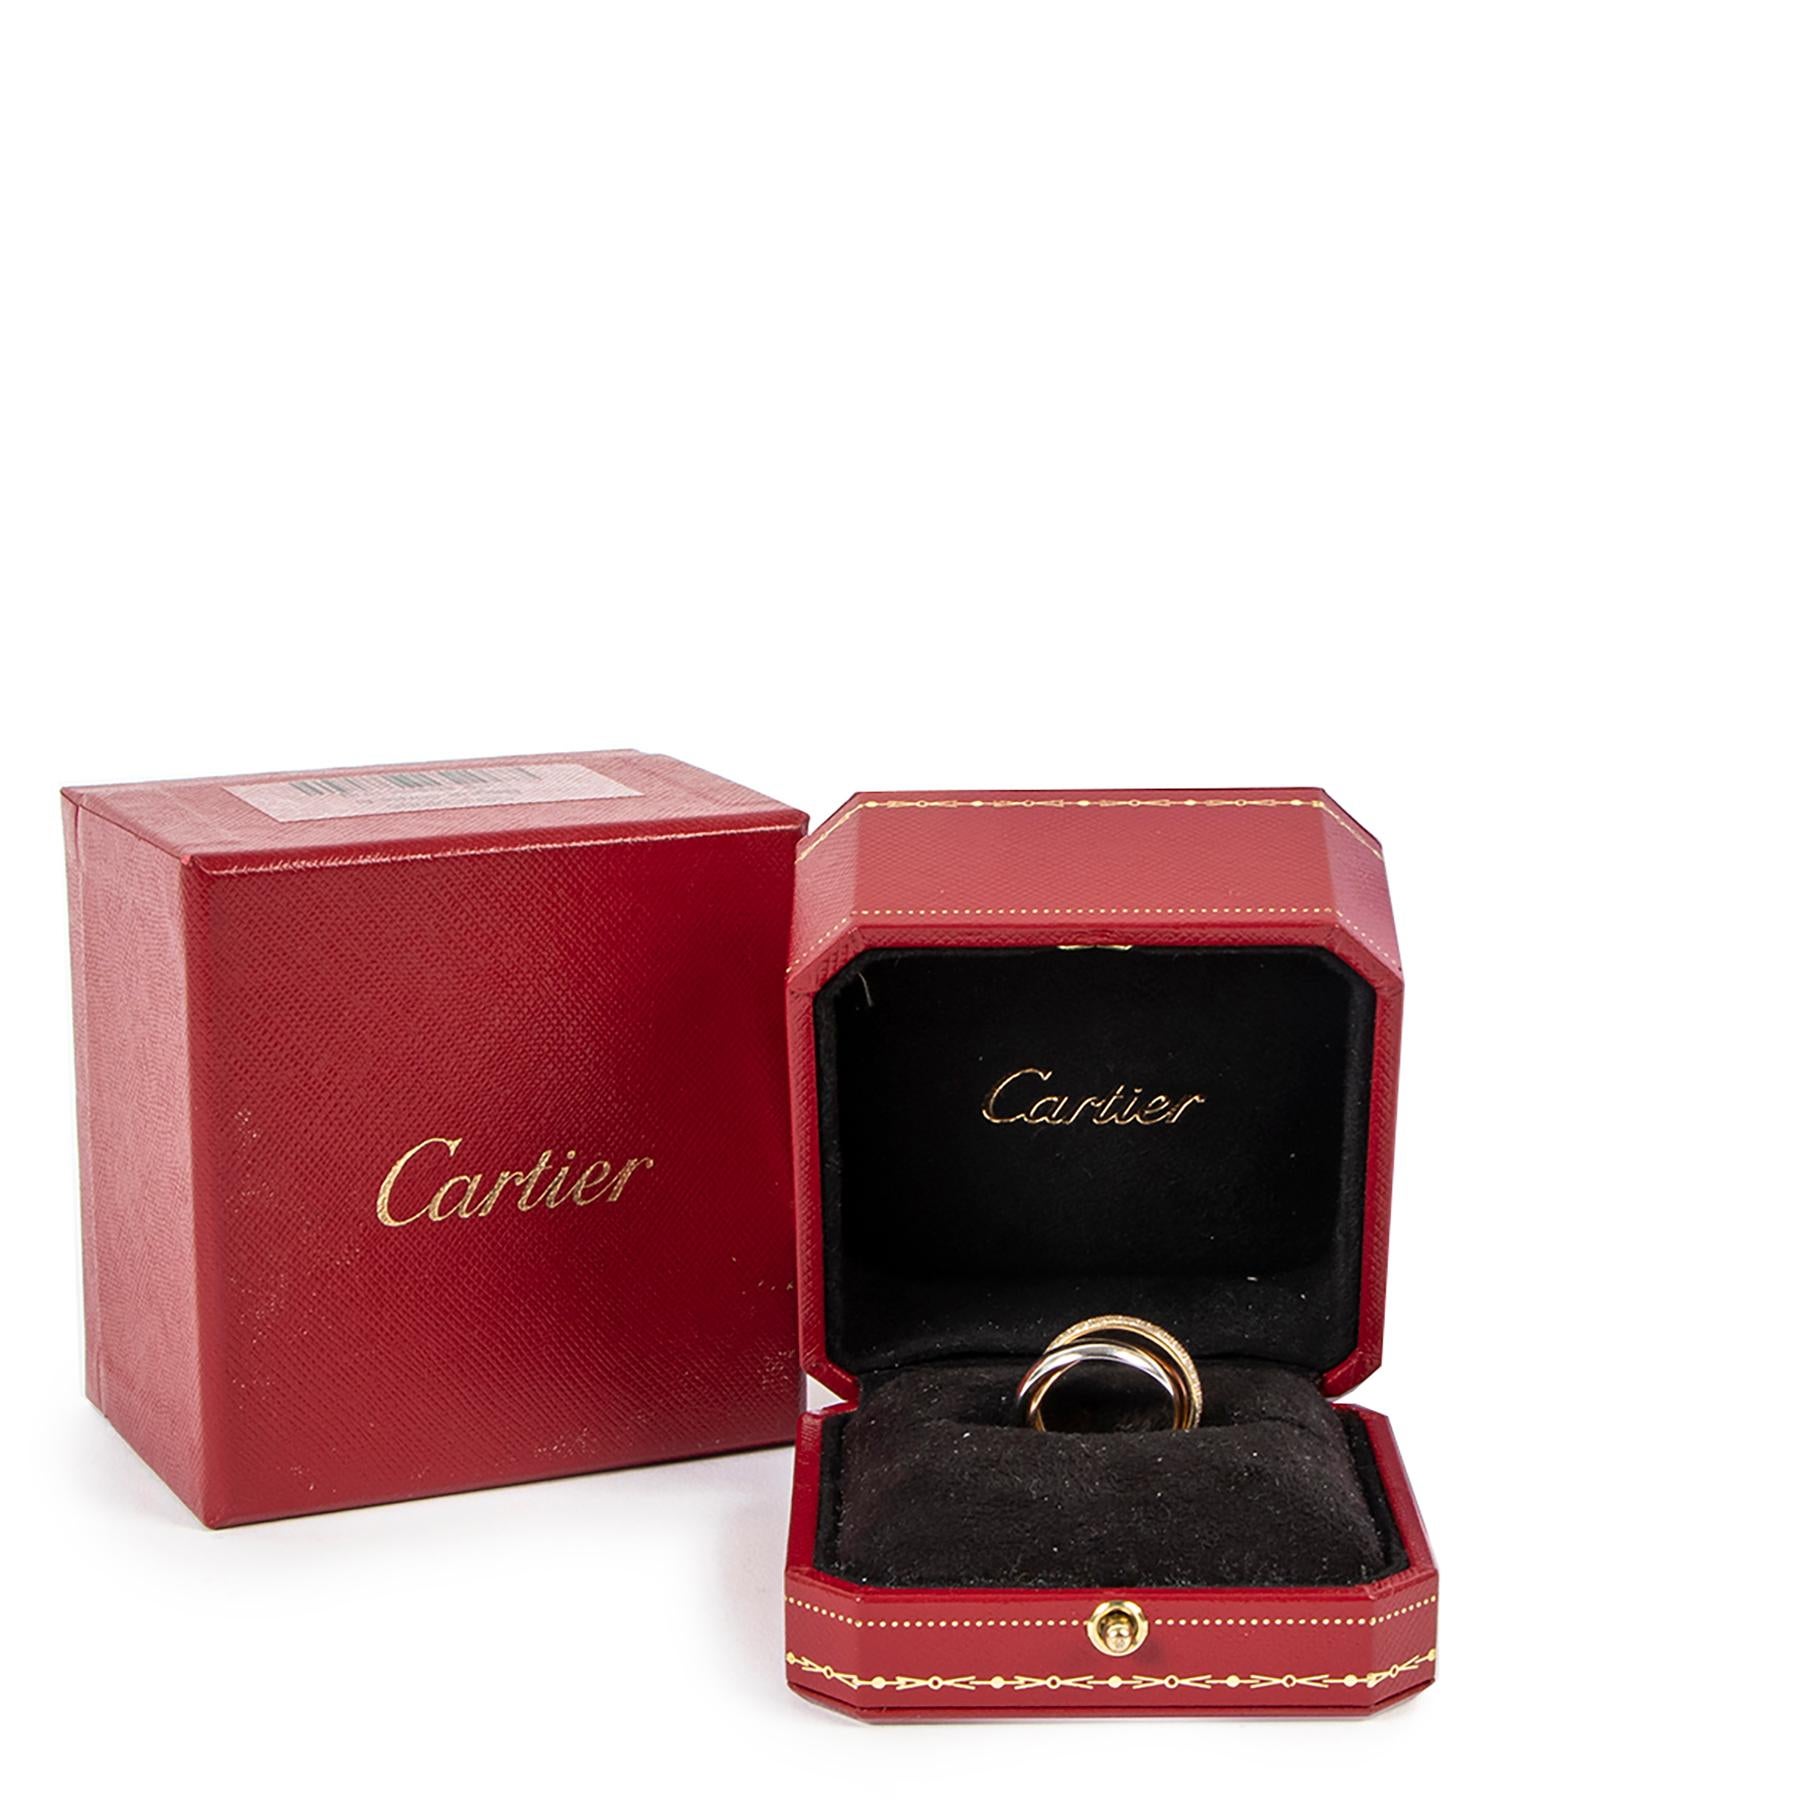 This iconic Cartier Trinity ring in small model, white gold 750/1000, rose gold 750/1000, yellow gold 750/1000, set with brilliant-cut diamonds.

Comes with:
Box
